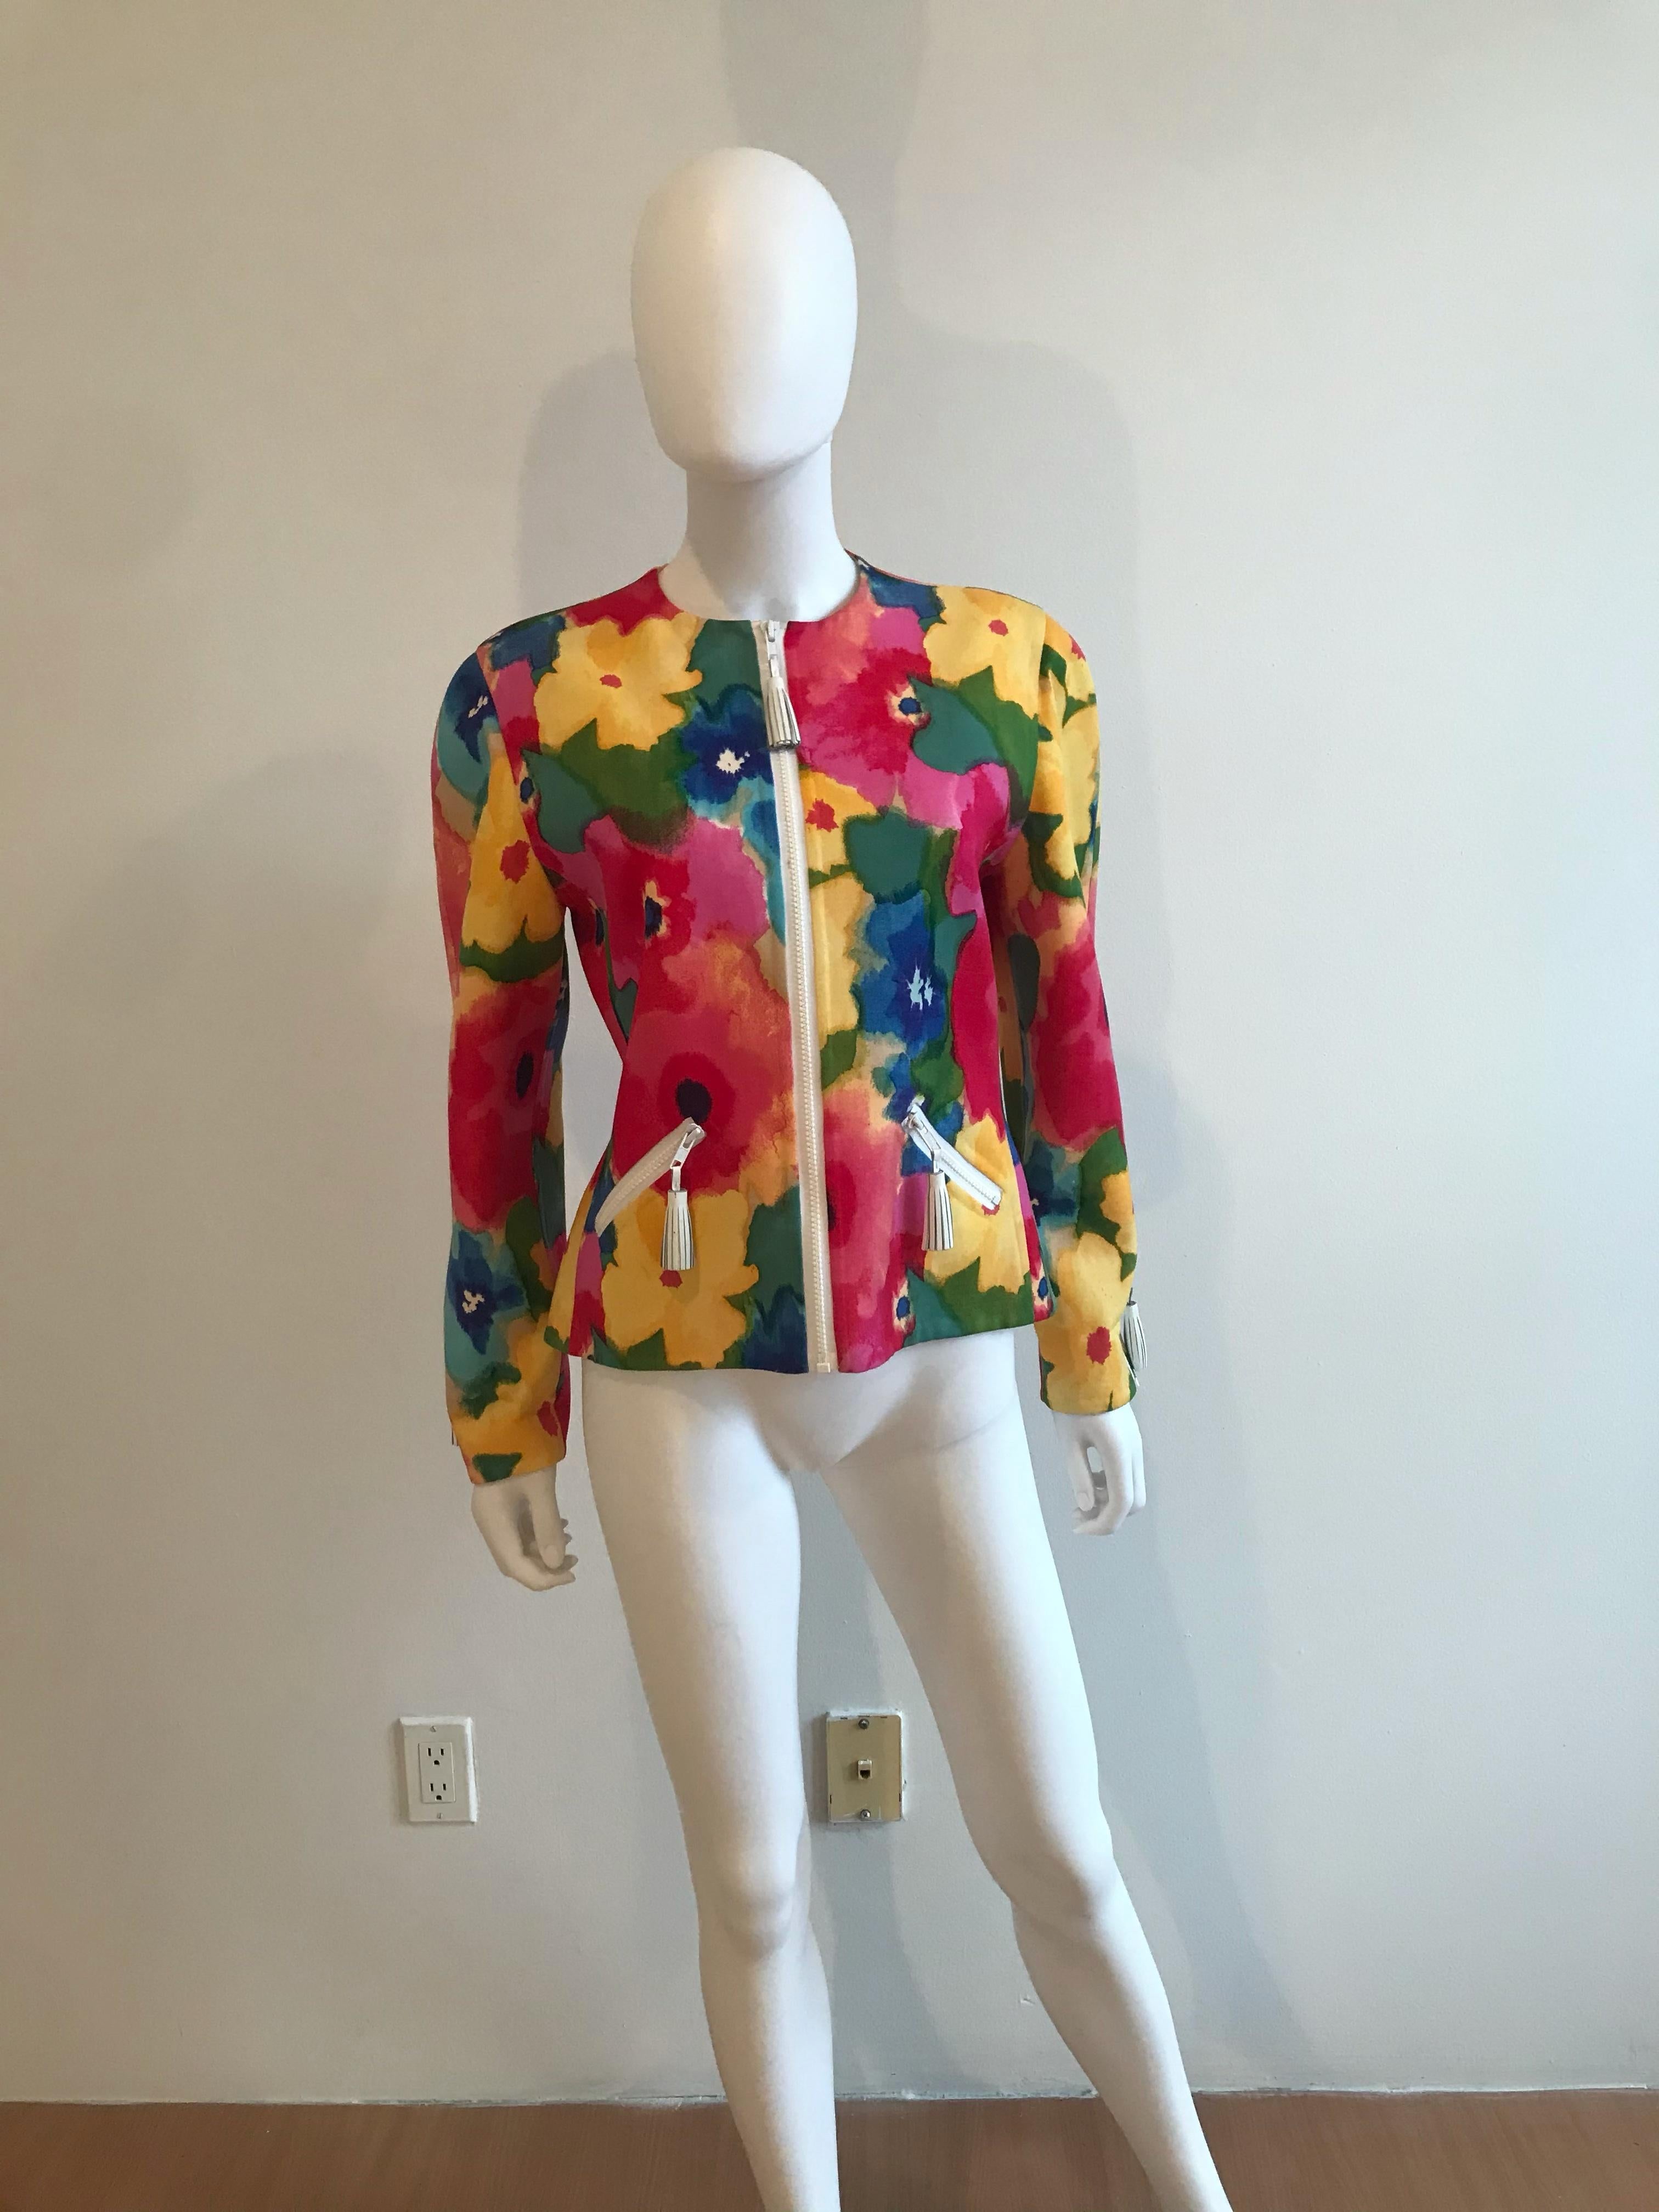 Bill Blass Vibrant watercolor floral printed jacket. 
Size Zippers with leather tassel detailed zippers. Size US 8. 
1990's Bill Blass label, Union made in the USA